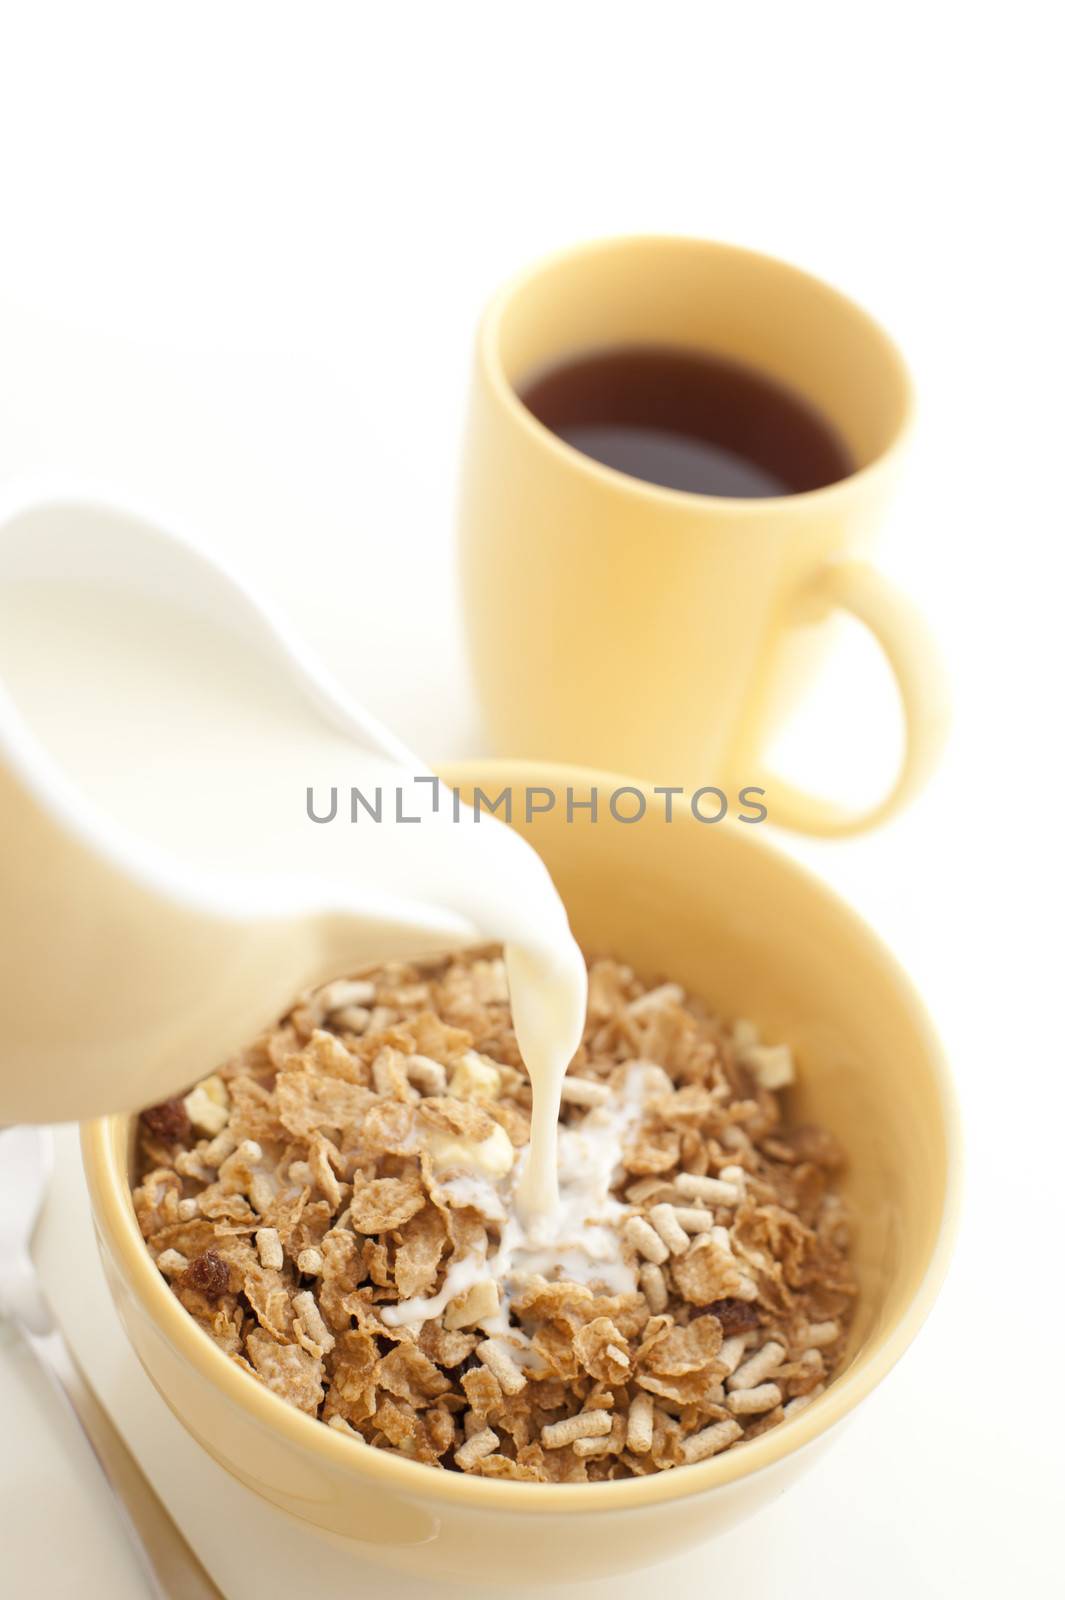 Pouring milk from a ceramic jug into a bowl of nutritional breakfast cereal or muesli with a freshly brewed mug of espresso coffee alongside